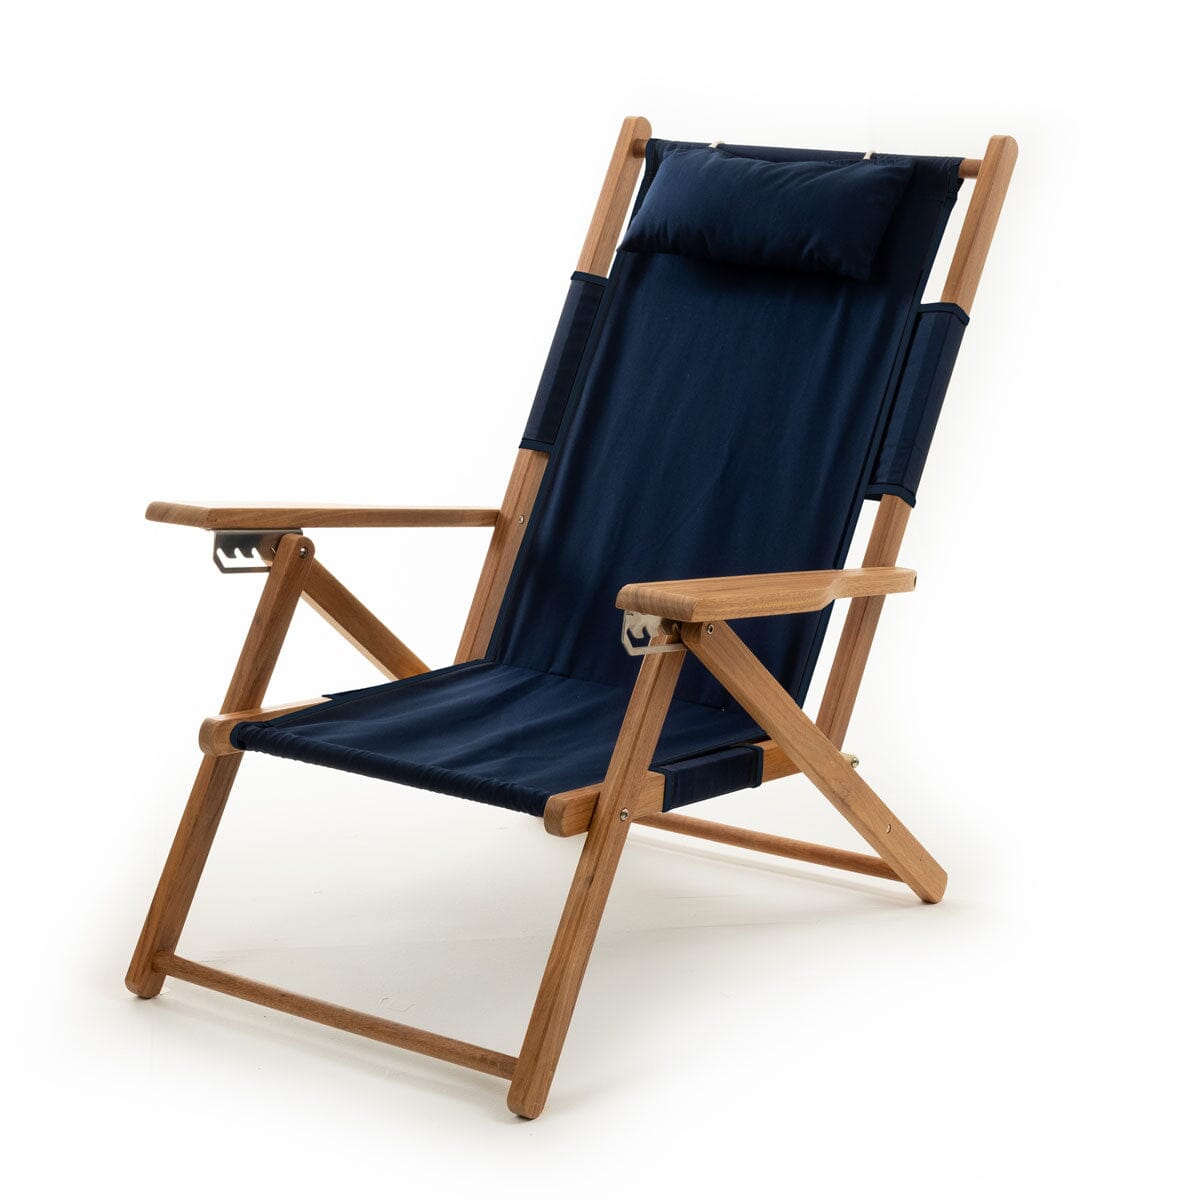 The Tommy Chair - Boathouse Navy